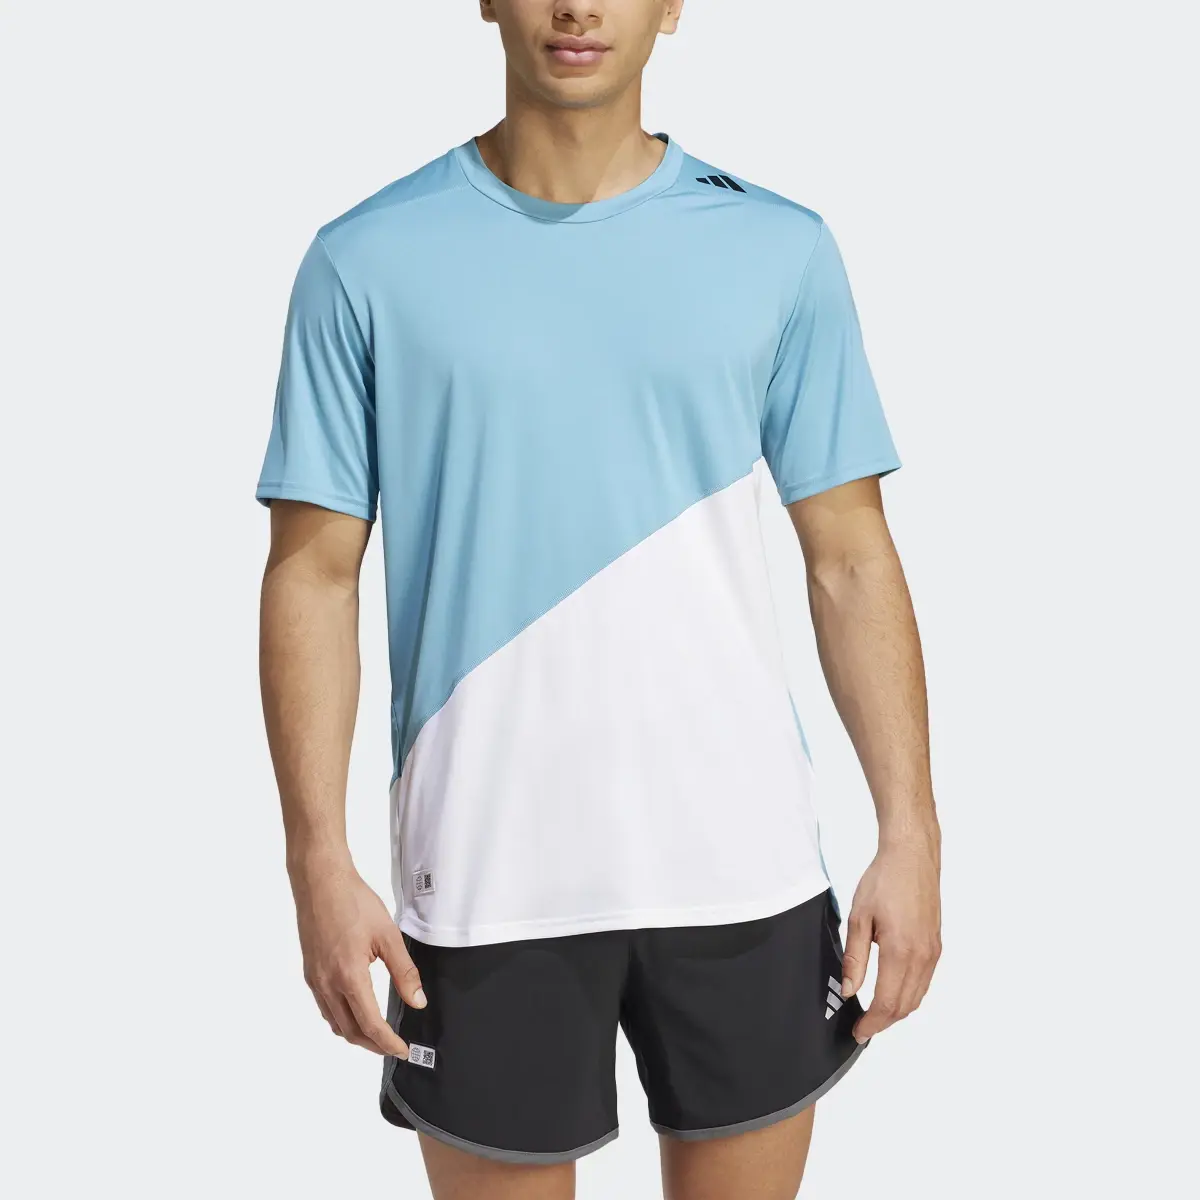 Adidas Made to be Remade Running T-Shirt. 1